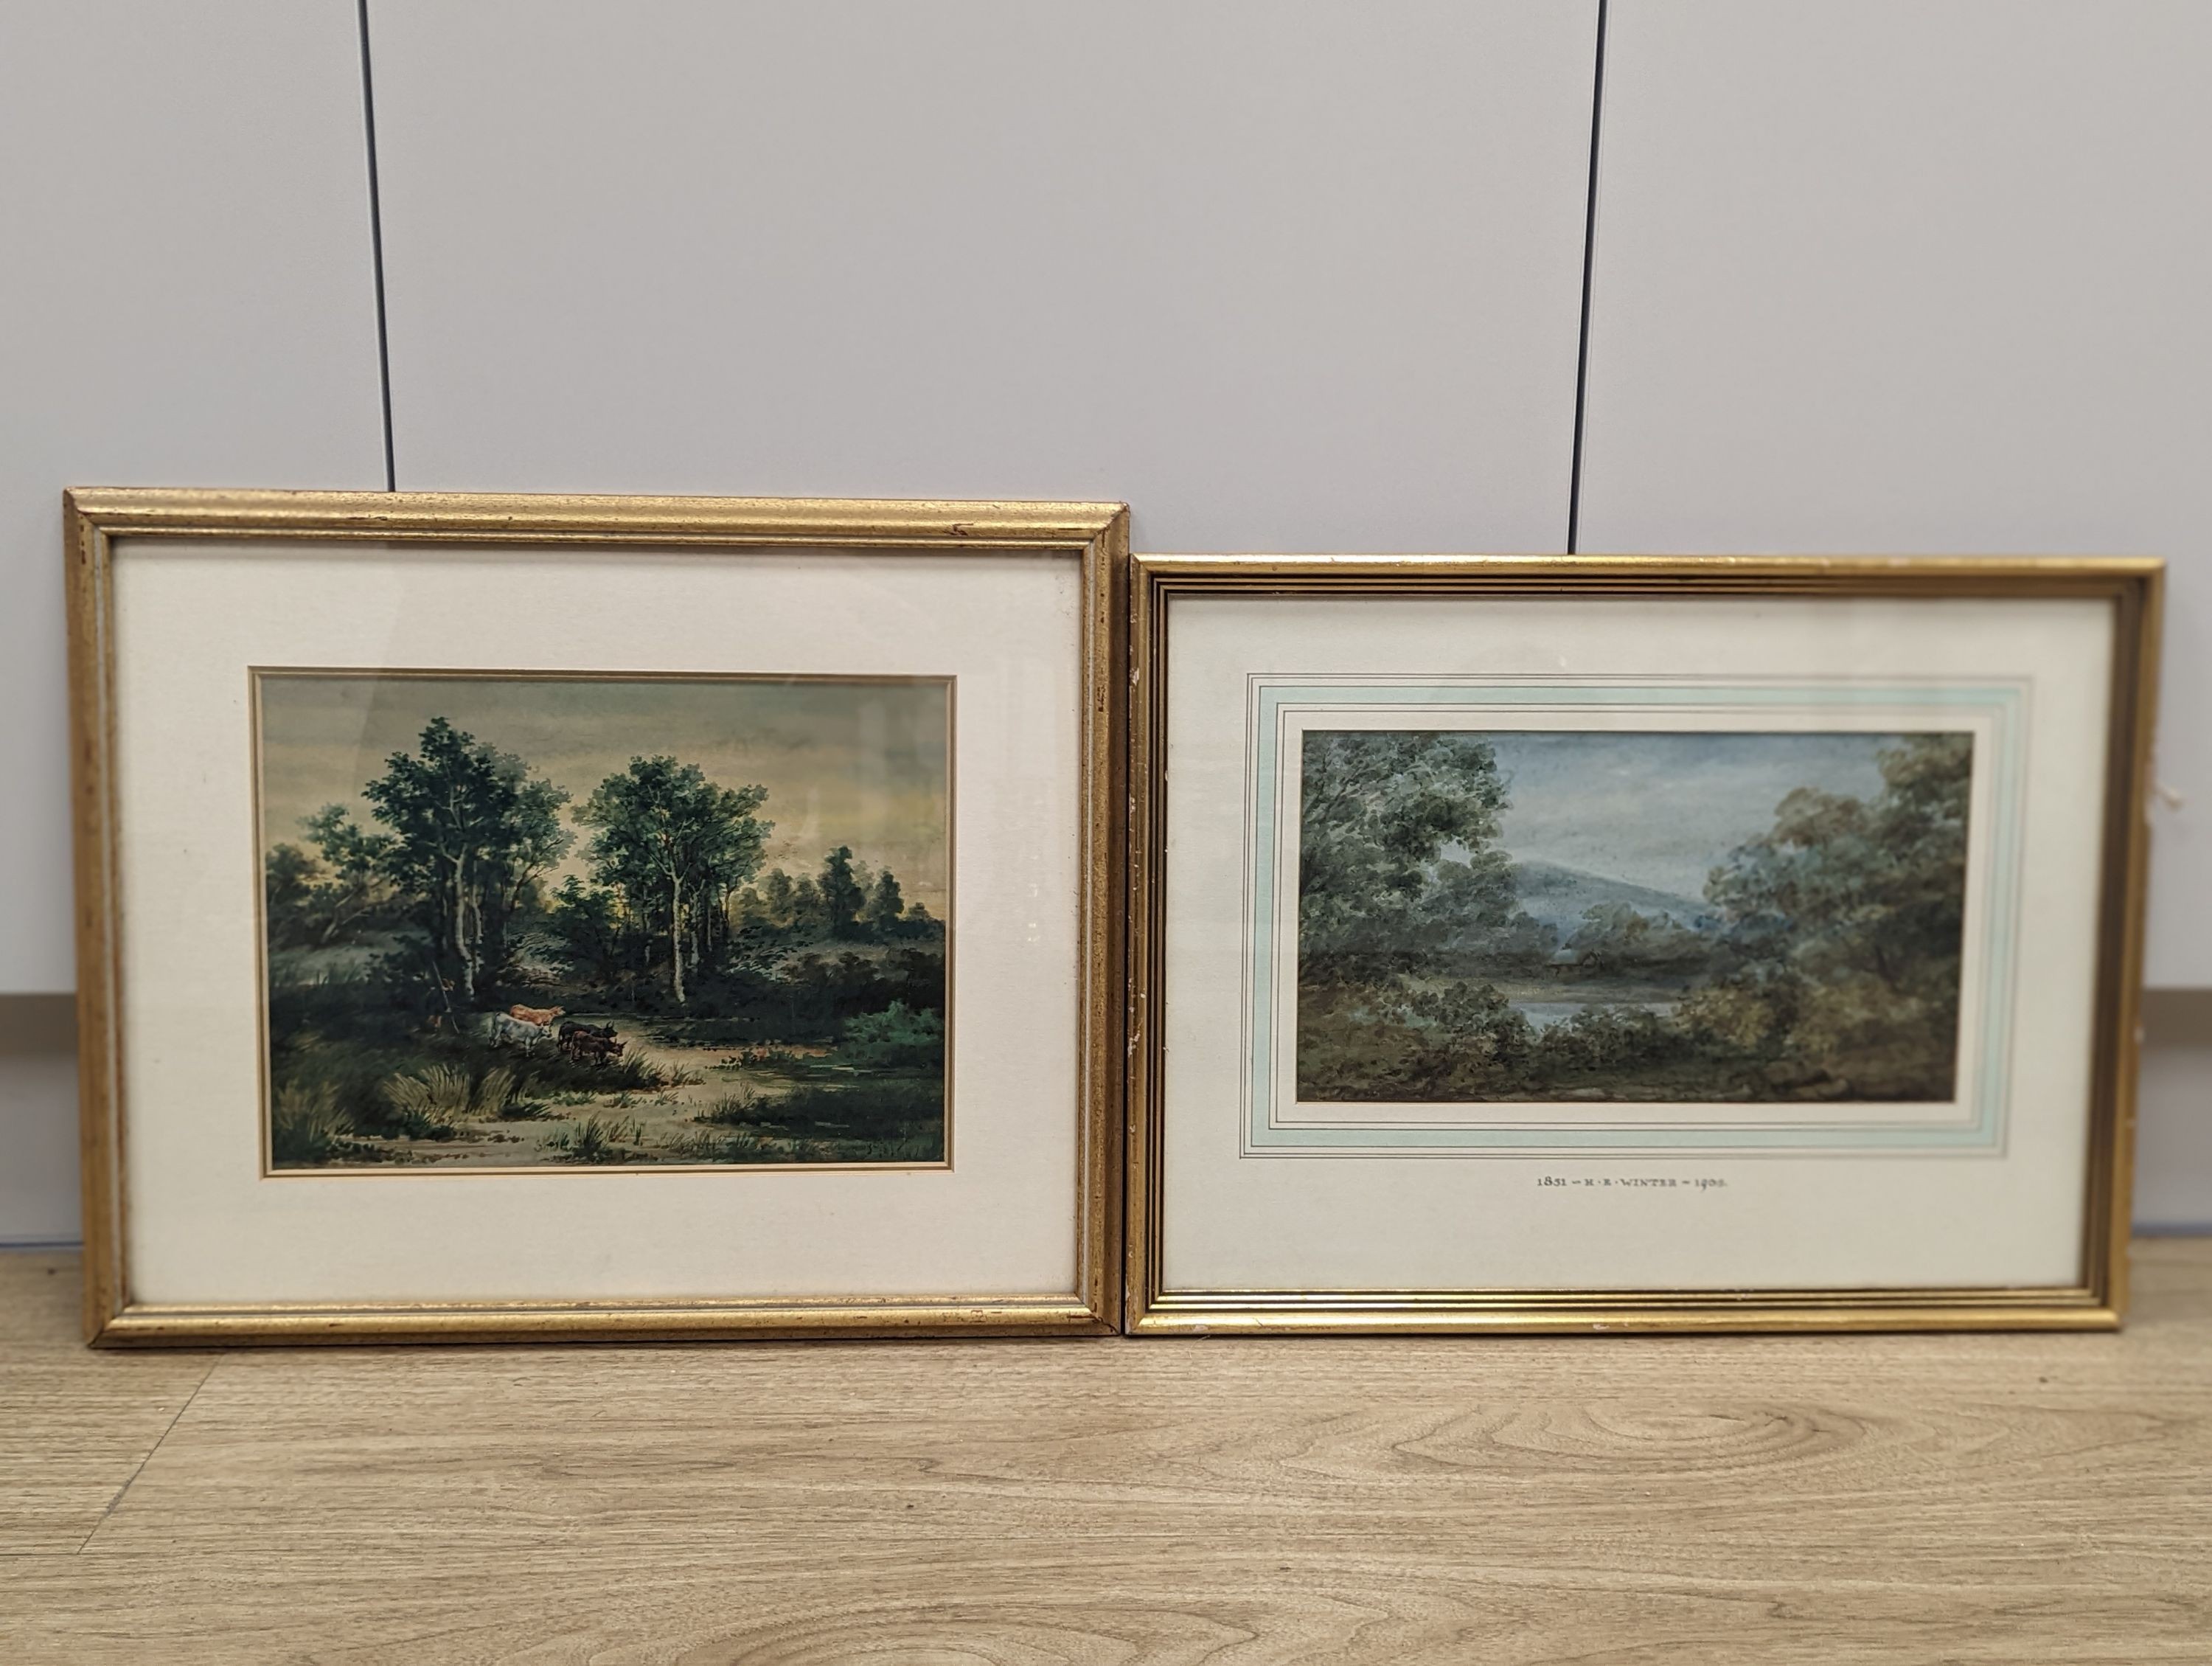 Attributed to Holmes Edwin Winter (1851-1935), watercolour, Landscape, 16 x 29cm, together with one other 19th century English landscape of cows by a river, signed and dated (2)